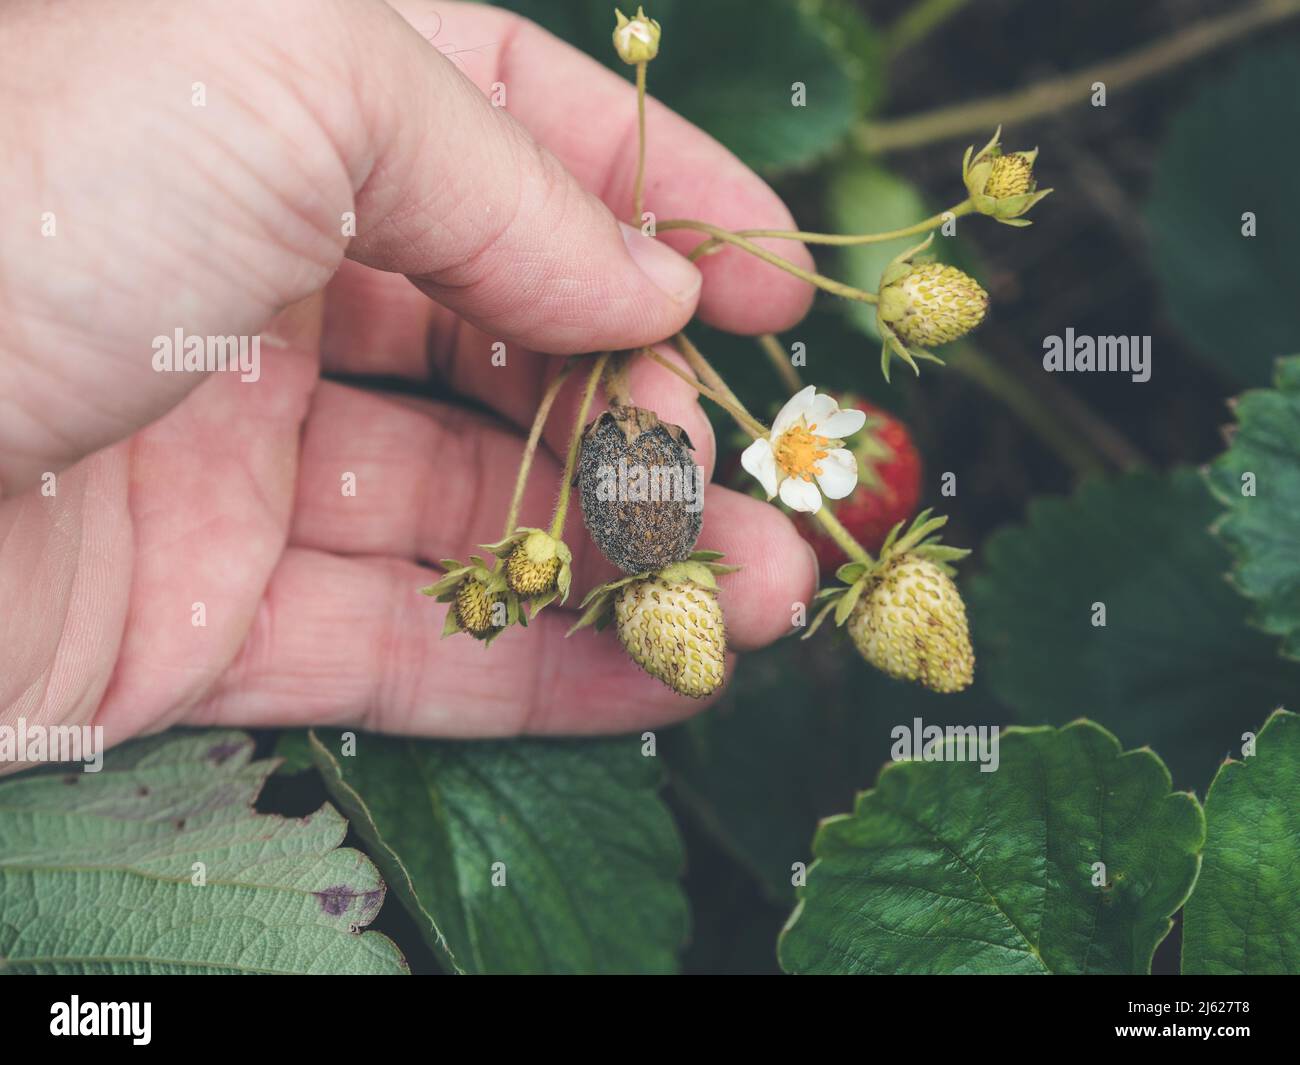 photo shows a hand holding a strawbery with Botrytis fruit rot or gray mold of strawberries - landscape format Stock Photo